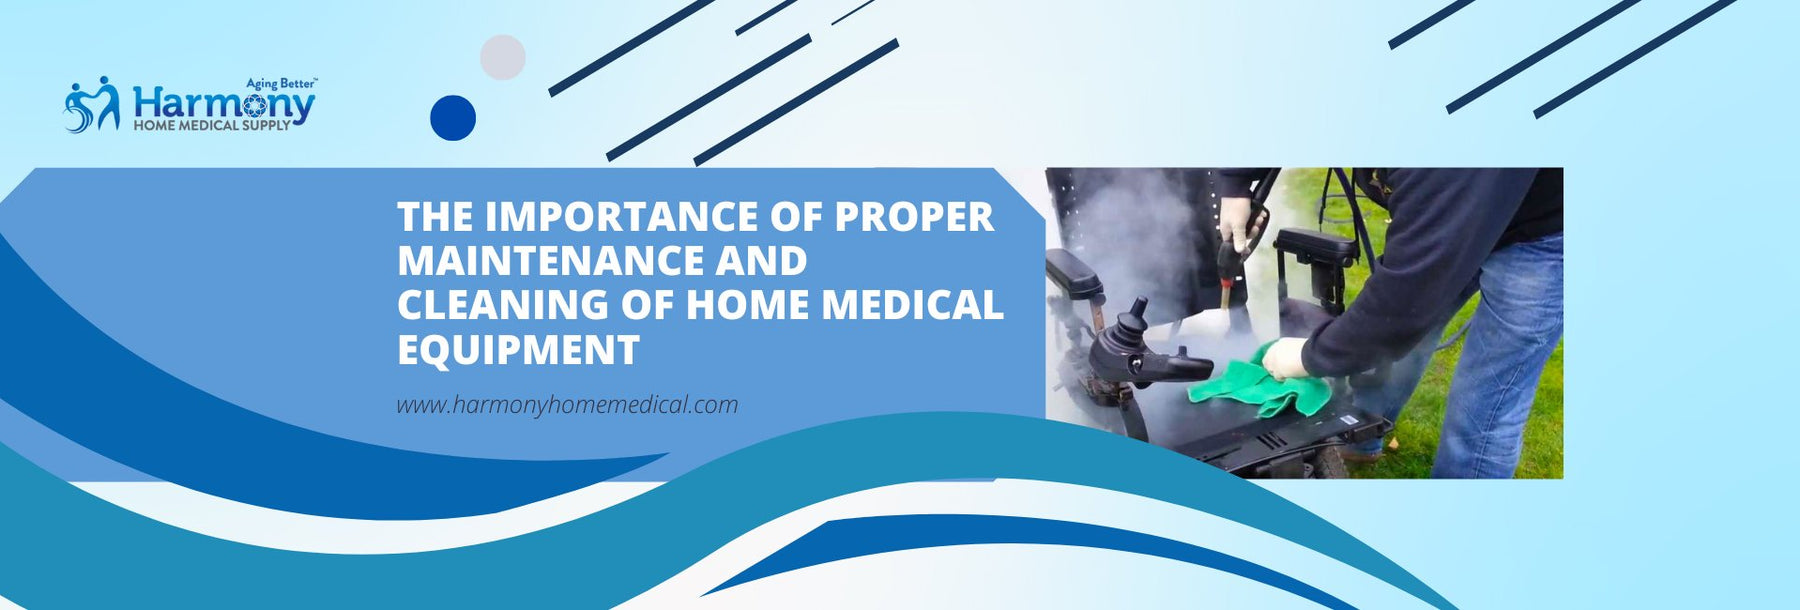 The Importance of Proper Maintenance and Cleaning of Home Medical Equipment - Harmony Home Medical Supply